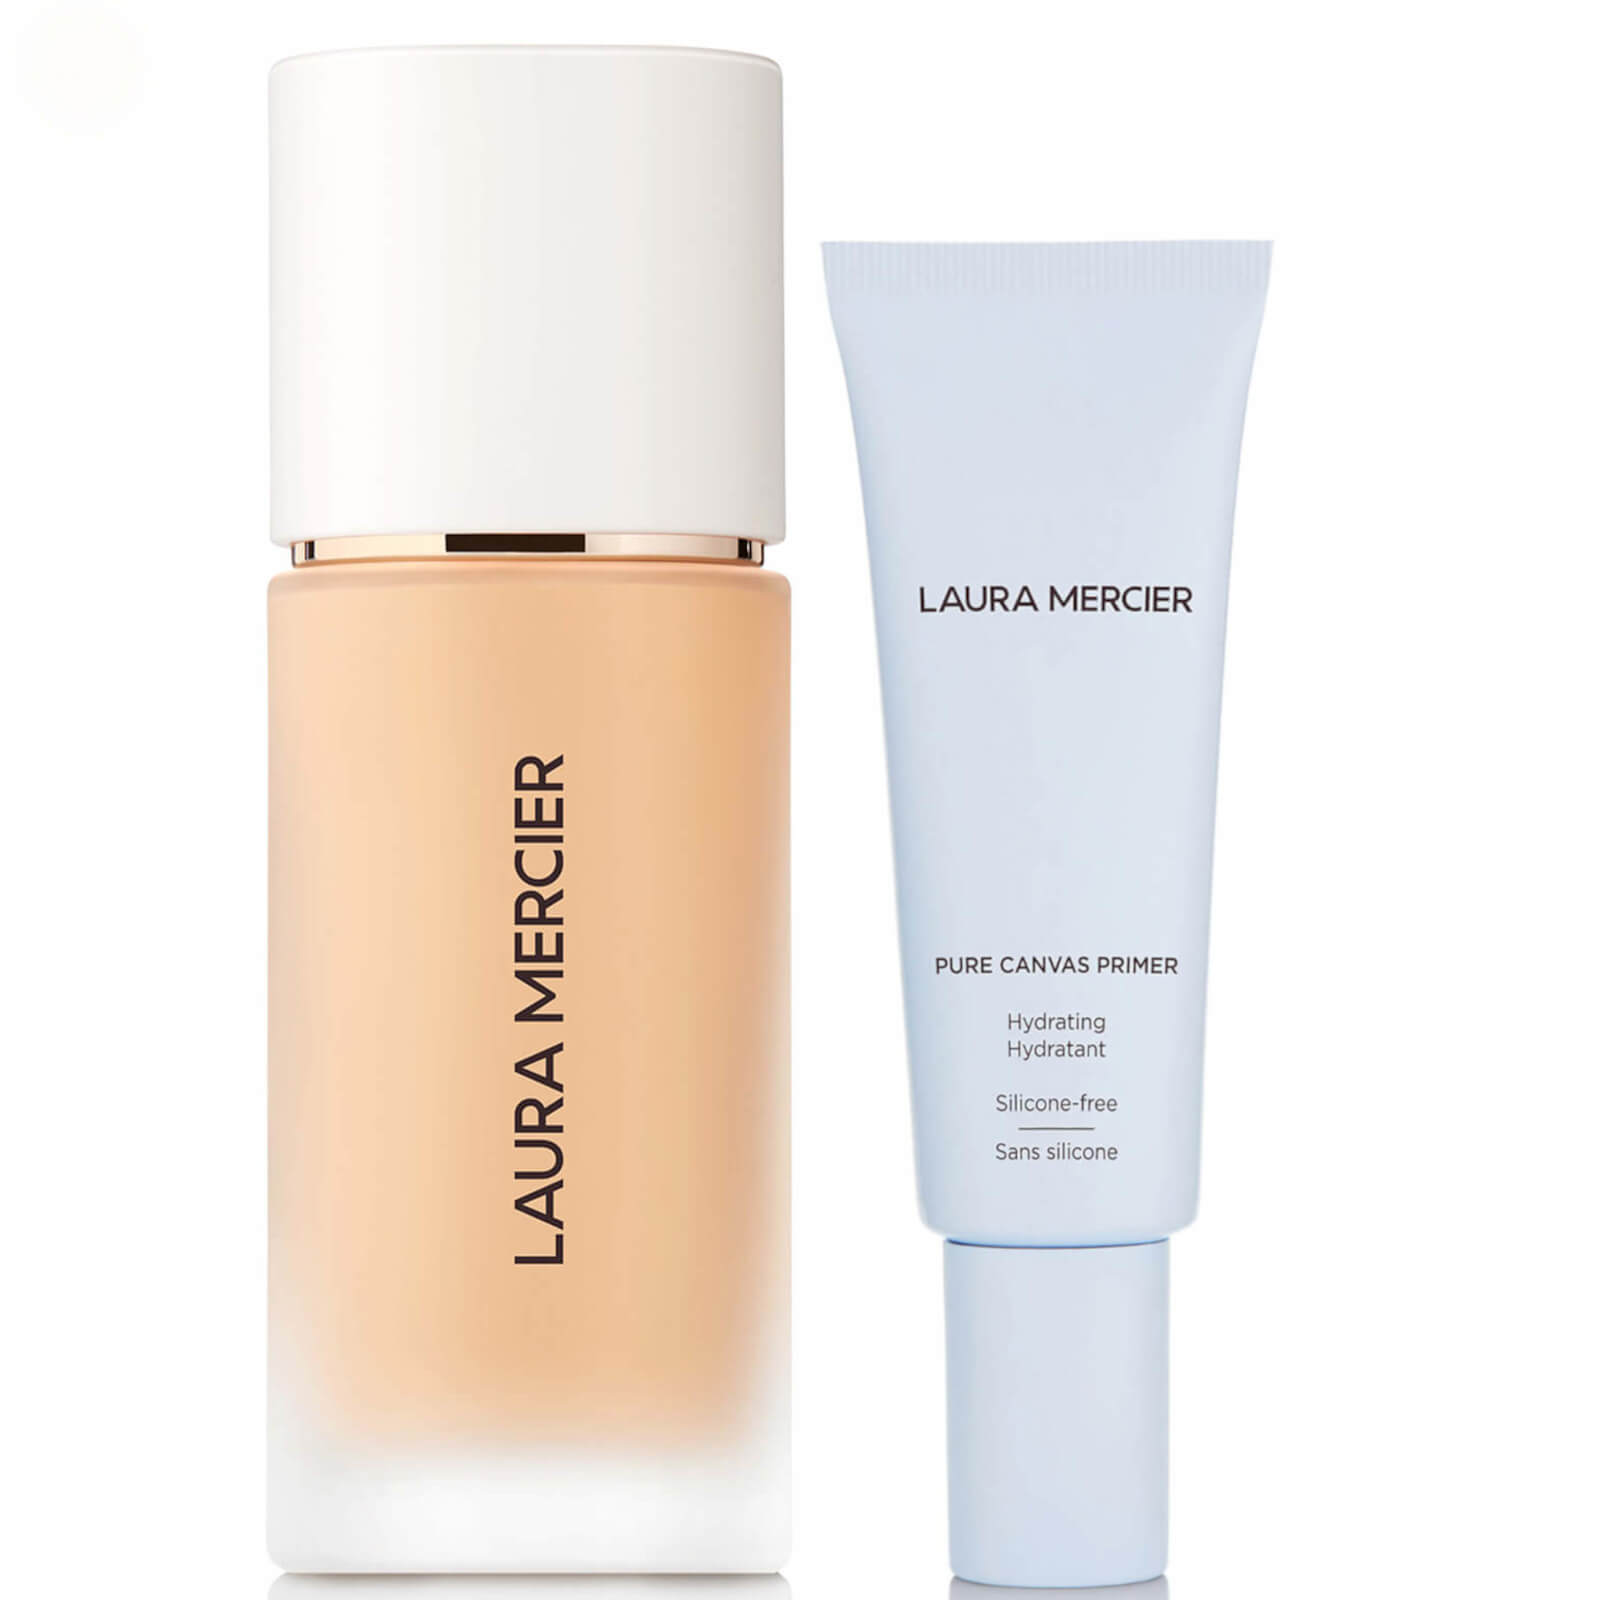 Laura Mercier Real Flawless Foundation and Pure Canvas Hydrating Primer Bundle (Various Shades) - 1W